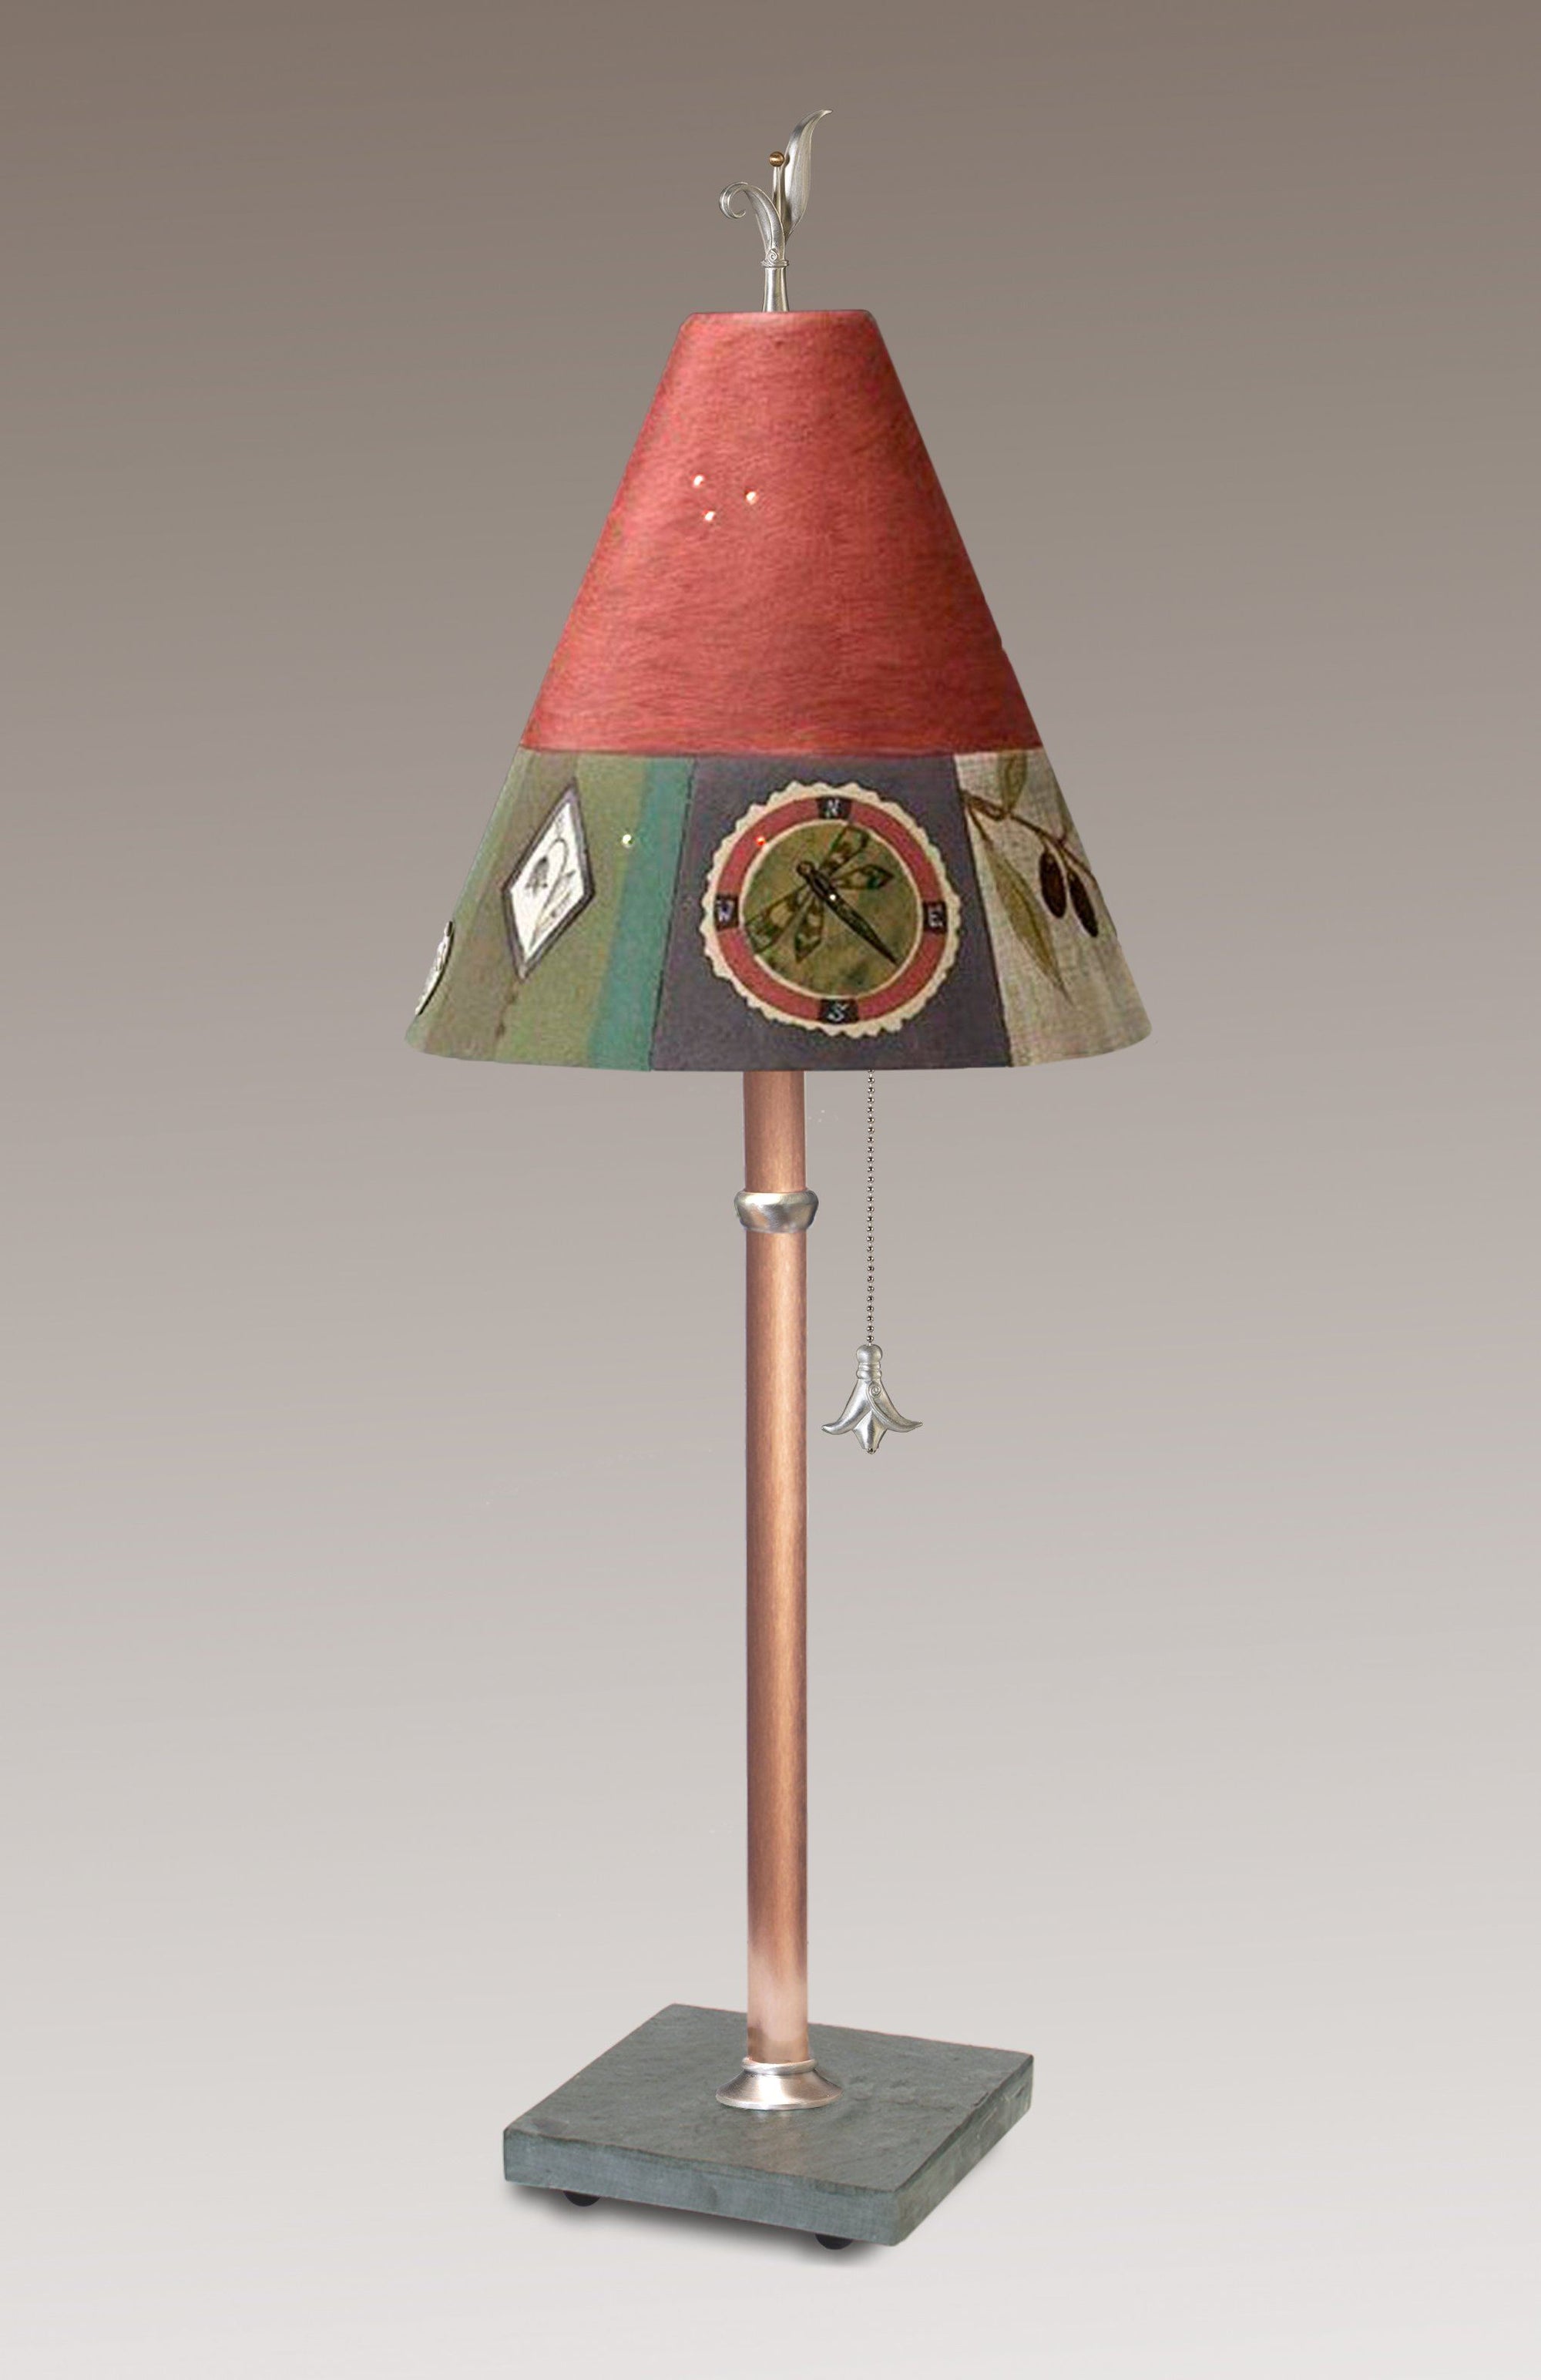 Janna Ugone & Co Table Lamps Copper Table Lamp with Small Conical Ceramic Shade in Lockets Rose